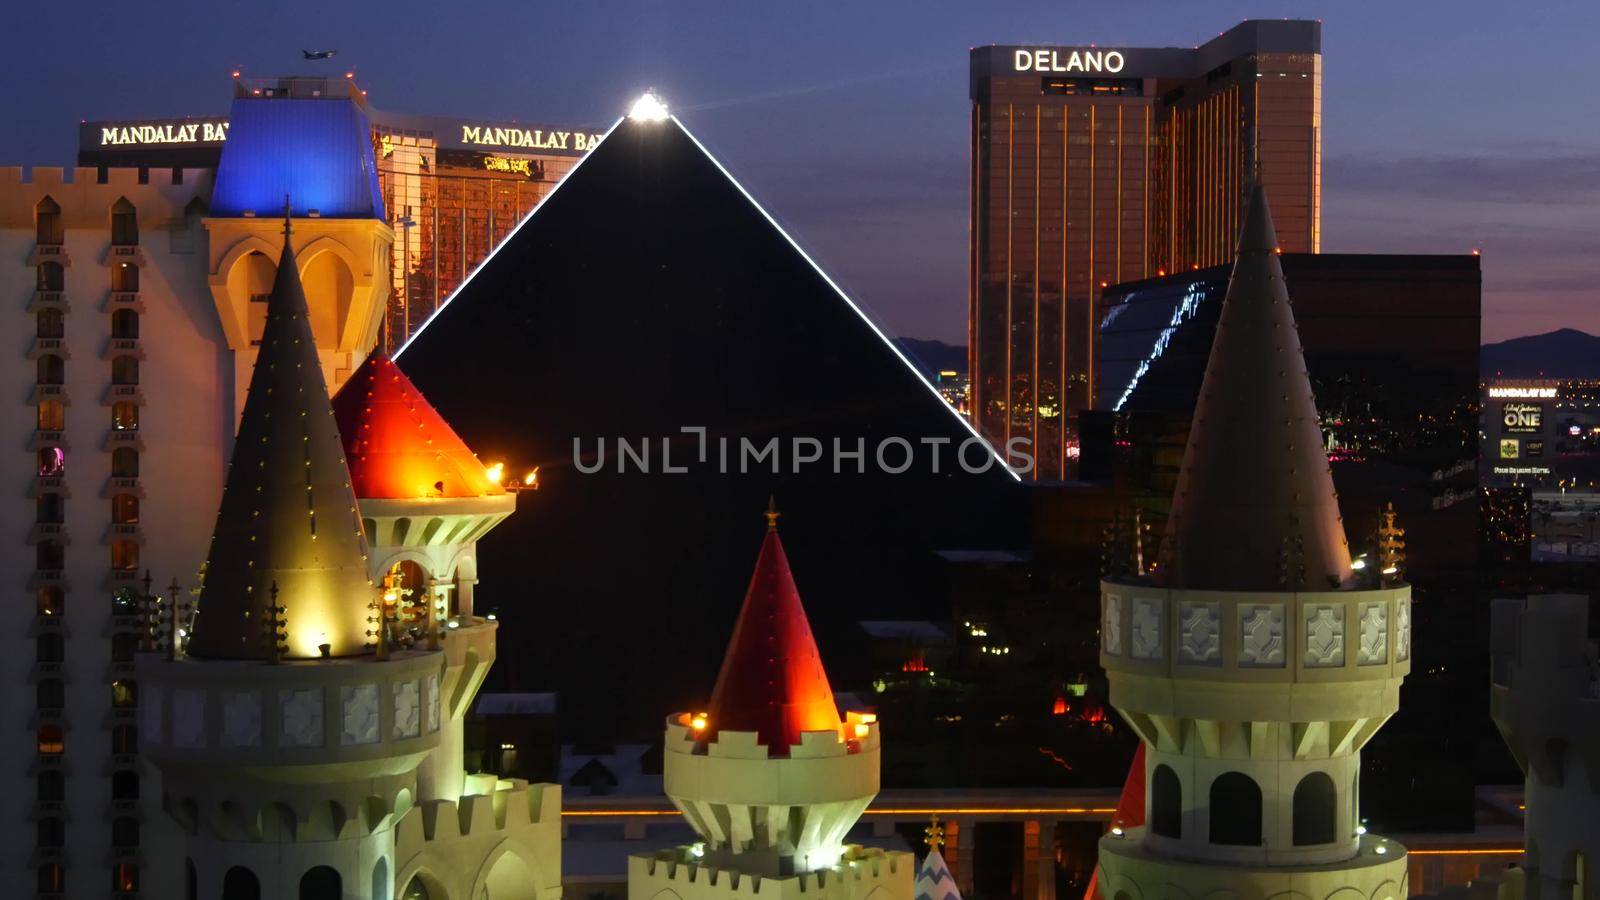 LAS VEGAS, NEVADA USA - 4 MAR 2020: Excalibur castle and Luxor pyramid casino uncommon aerial view. Plane flying from McCarran airport. Mandalay Bay and Delano hotel in american gambling sin city by DogoraSun